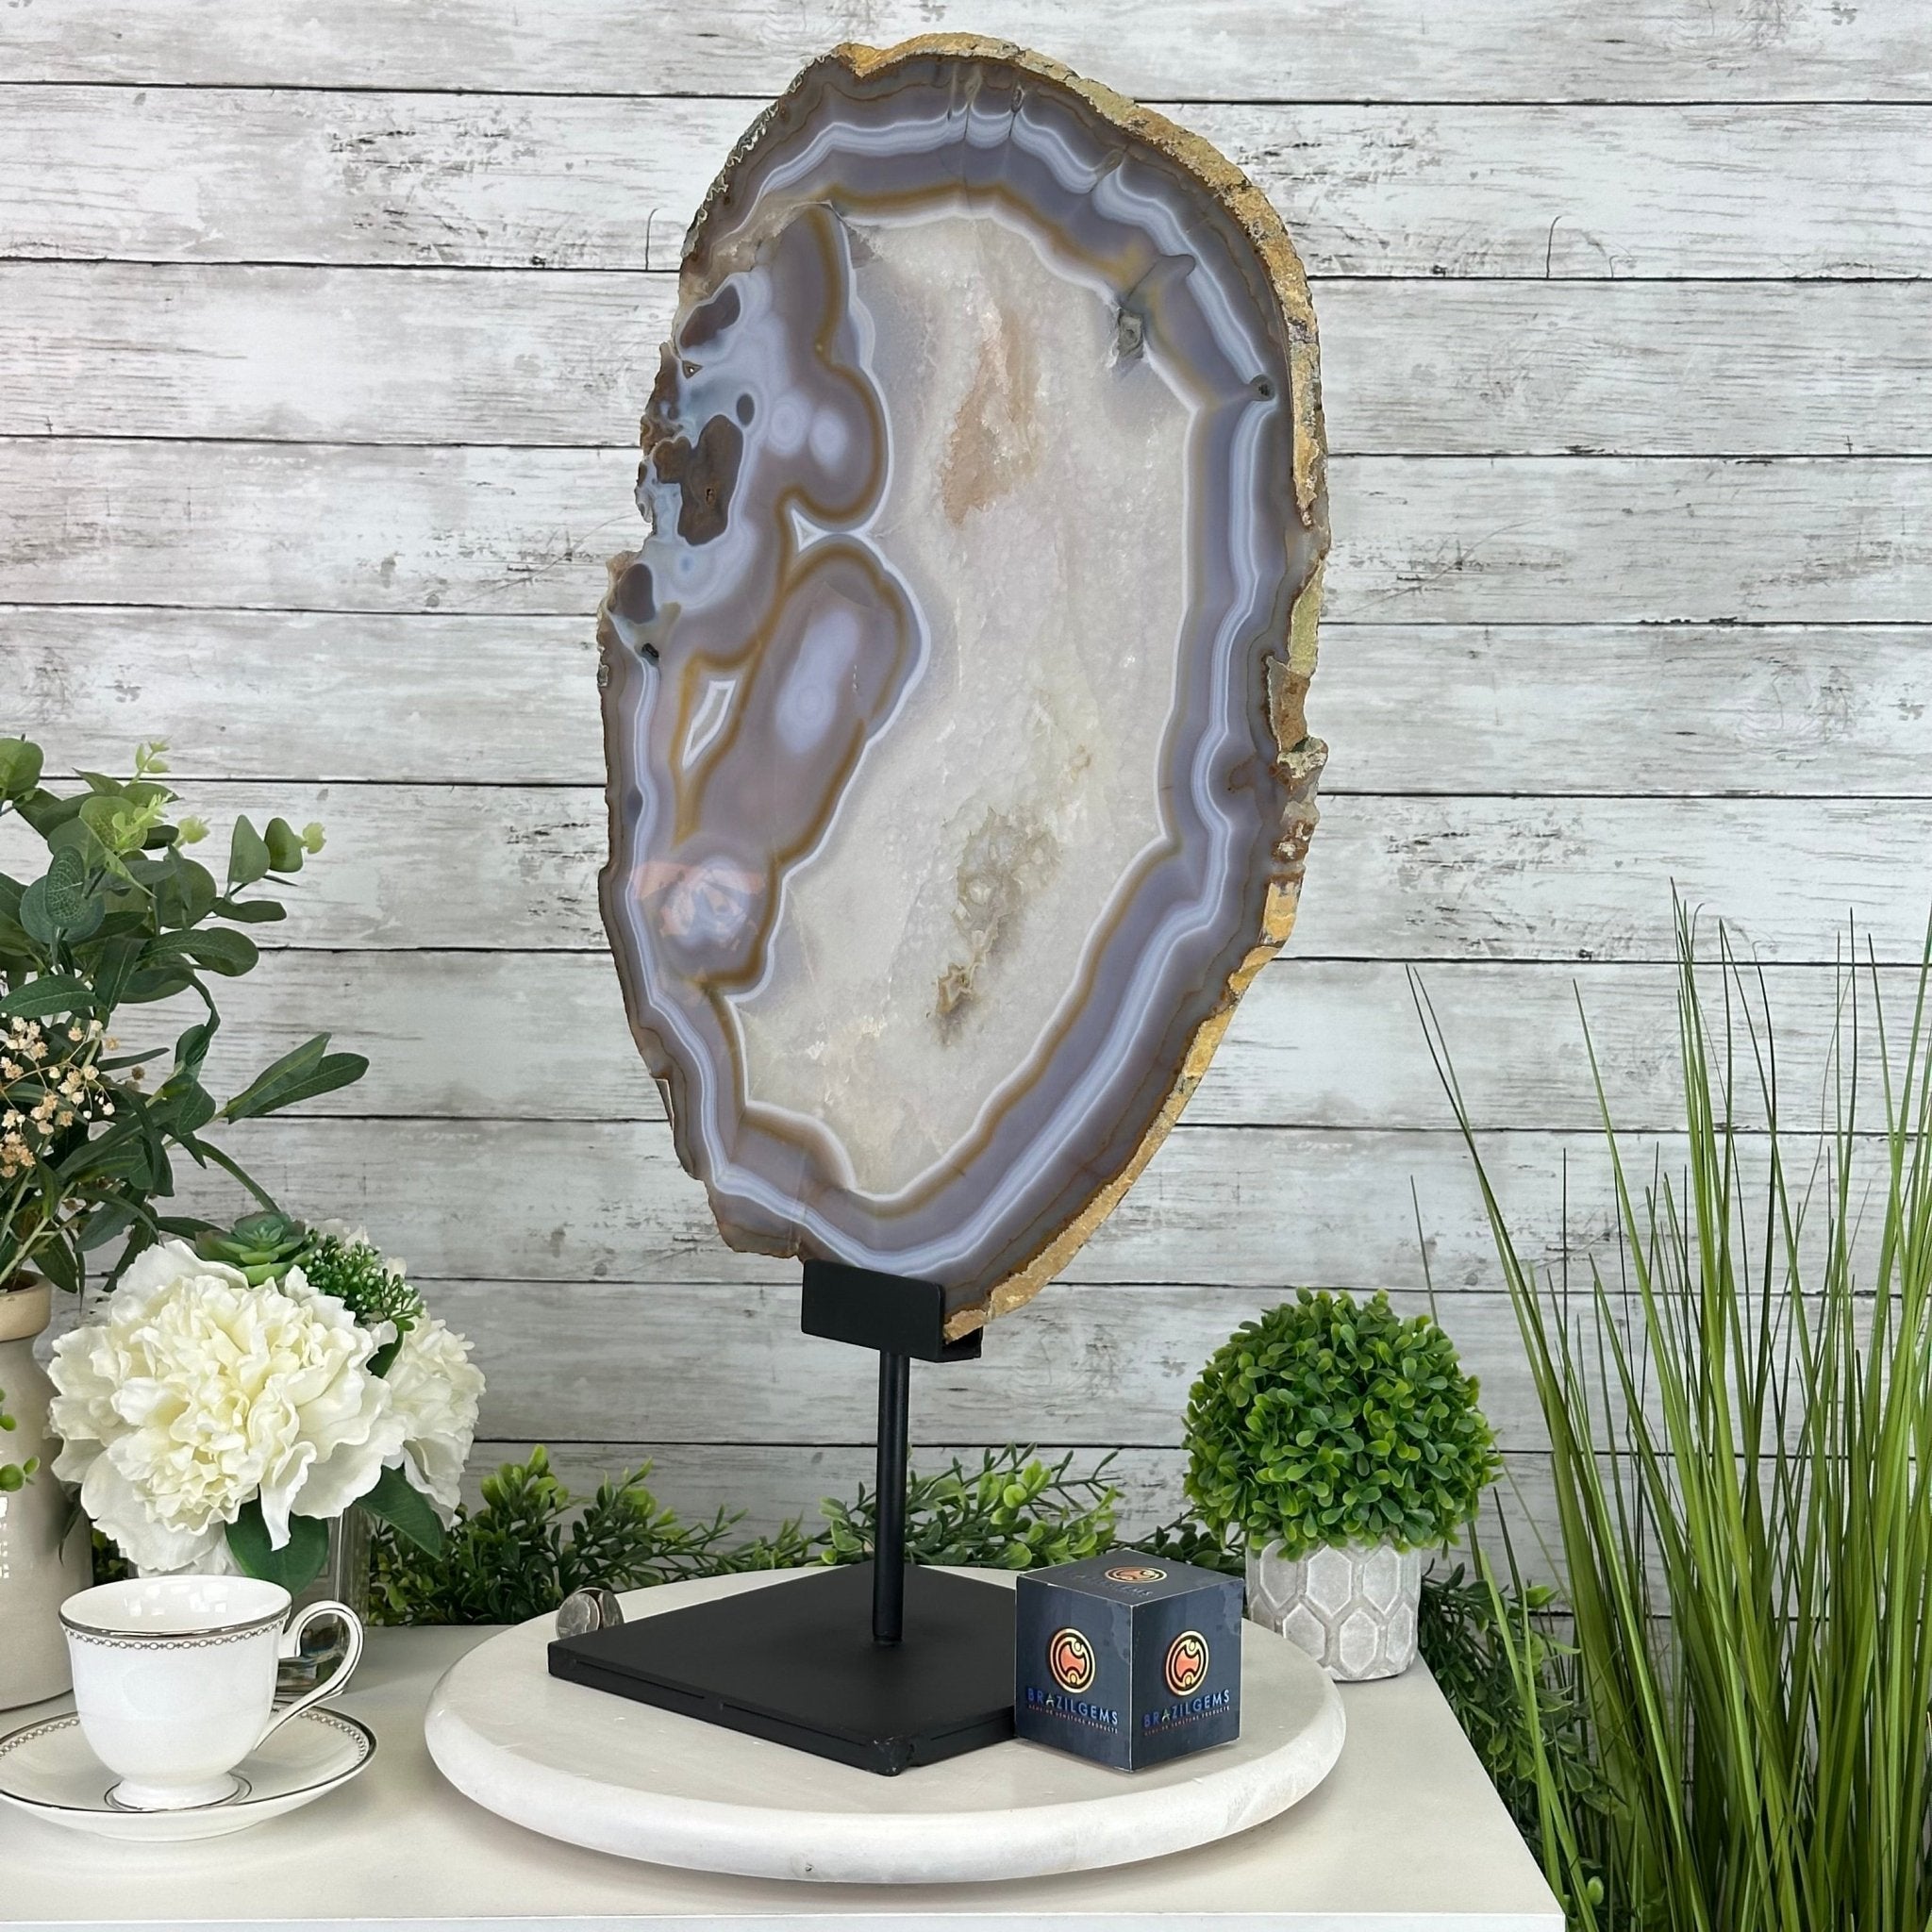 Special Large Natural Brazilian Agate slice on metal base, 26.9" Tall #5056-0042 - Brazil GemsBrazil GemsSpecial Large Natural Brazilian Agate slice on metal base, 26.9" Tall #5056-0042Slices on Fixed Bases5056-0042